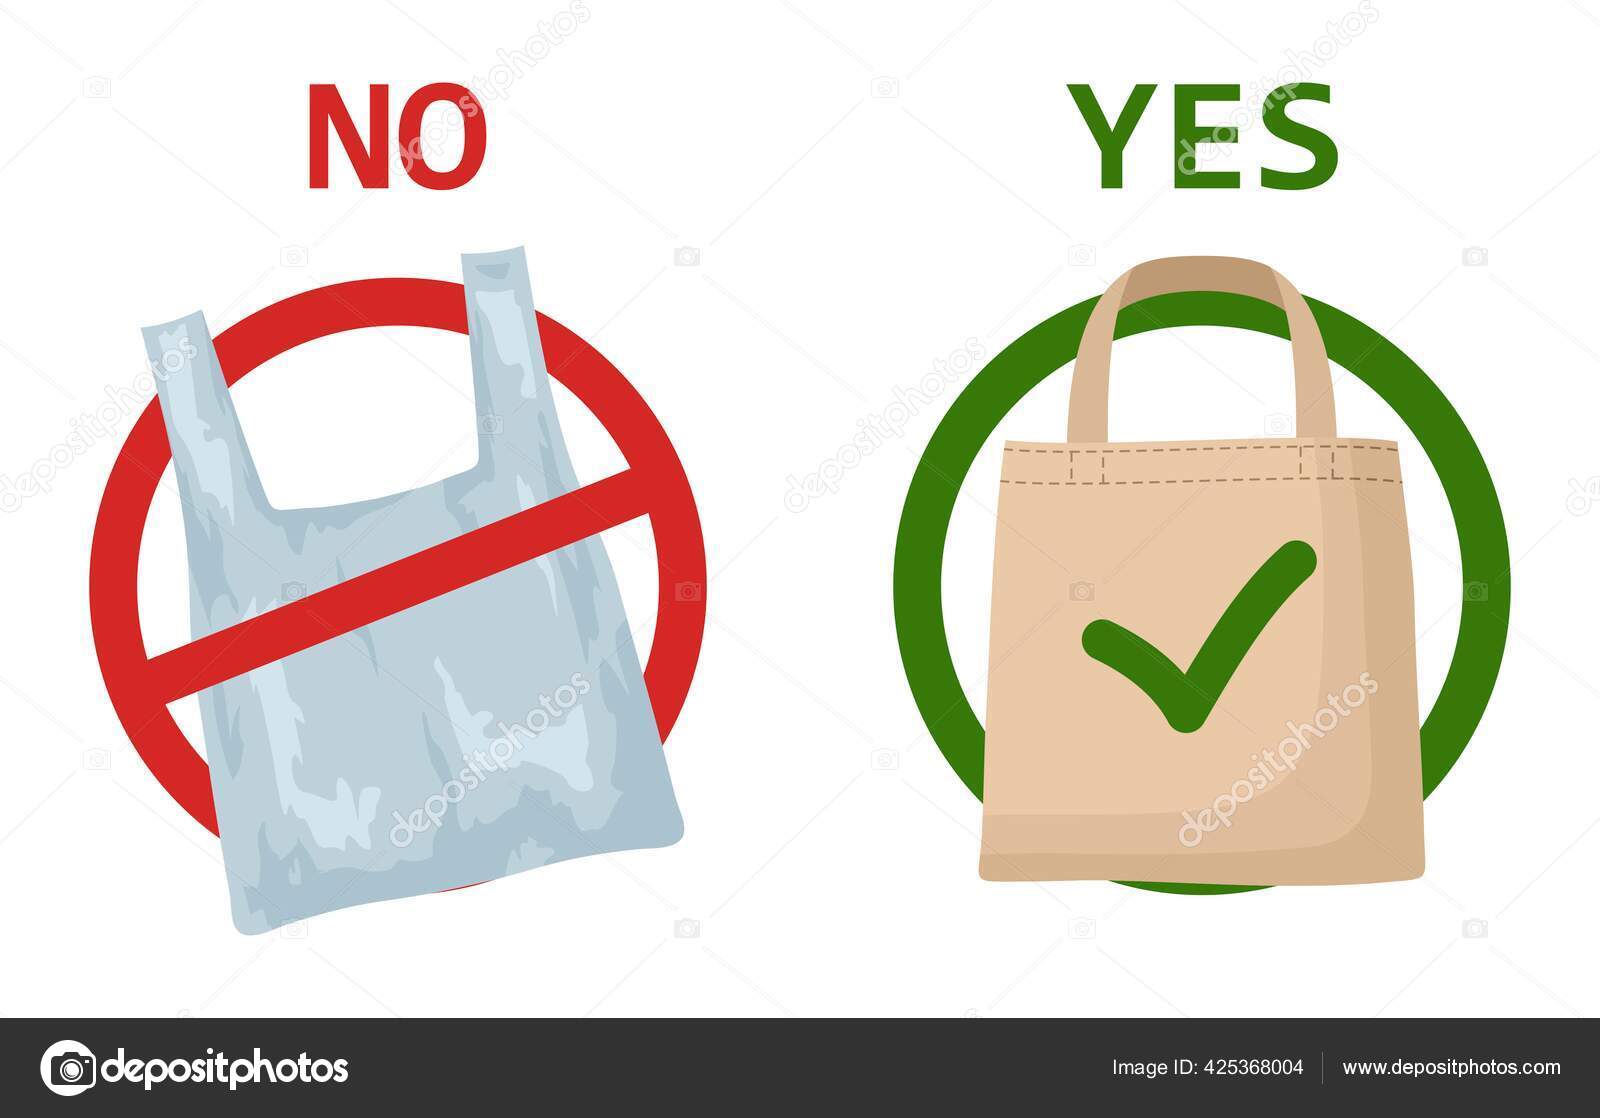 Why Should I Stop Using Plastic Bags?